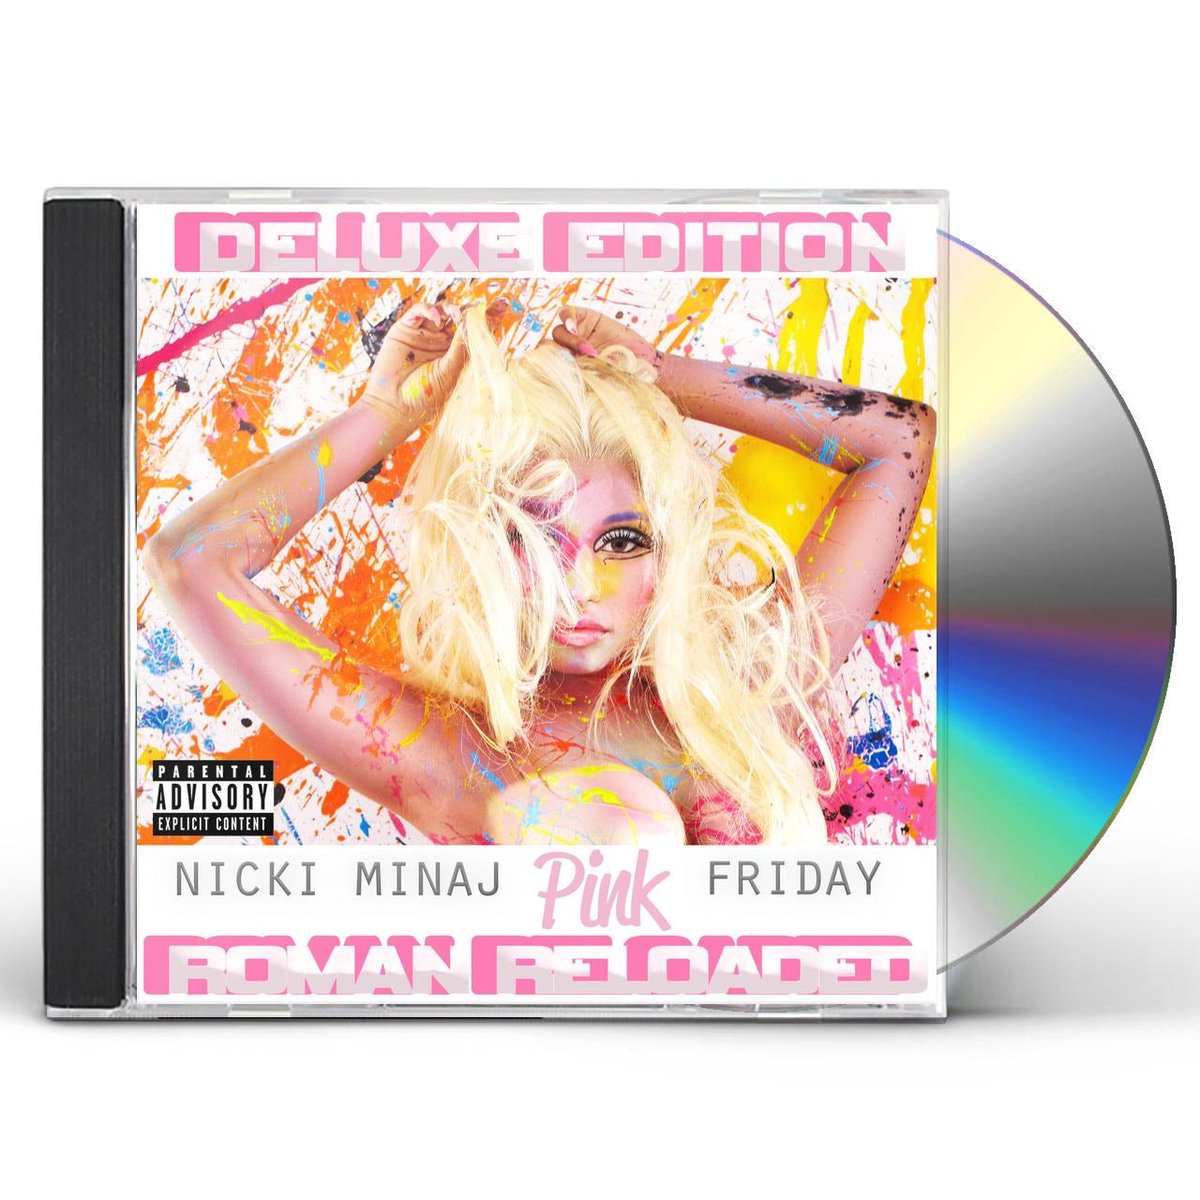 April 2012: Nicki Minaj releases her sophomore album Pink Friday: Roman Reloaded with a heavier EDM/Pop sound. The album debuted at #1 selling 253,000 its first week and went Platinum within 2 months of its release.